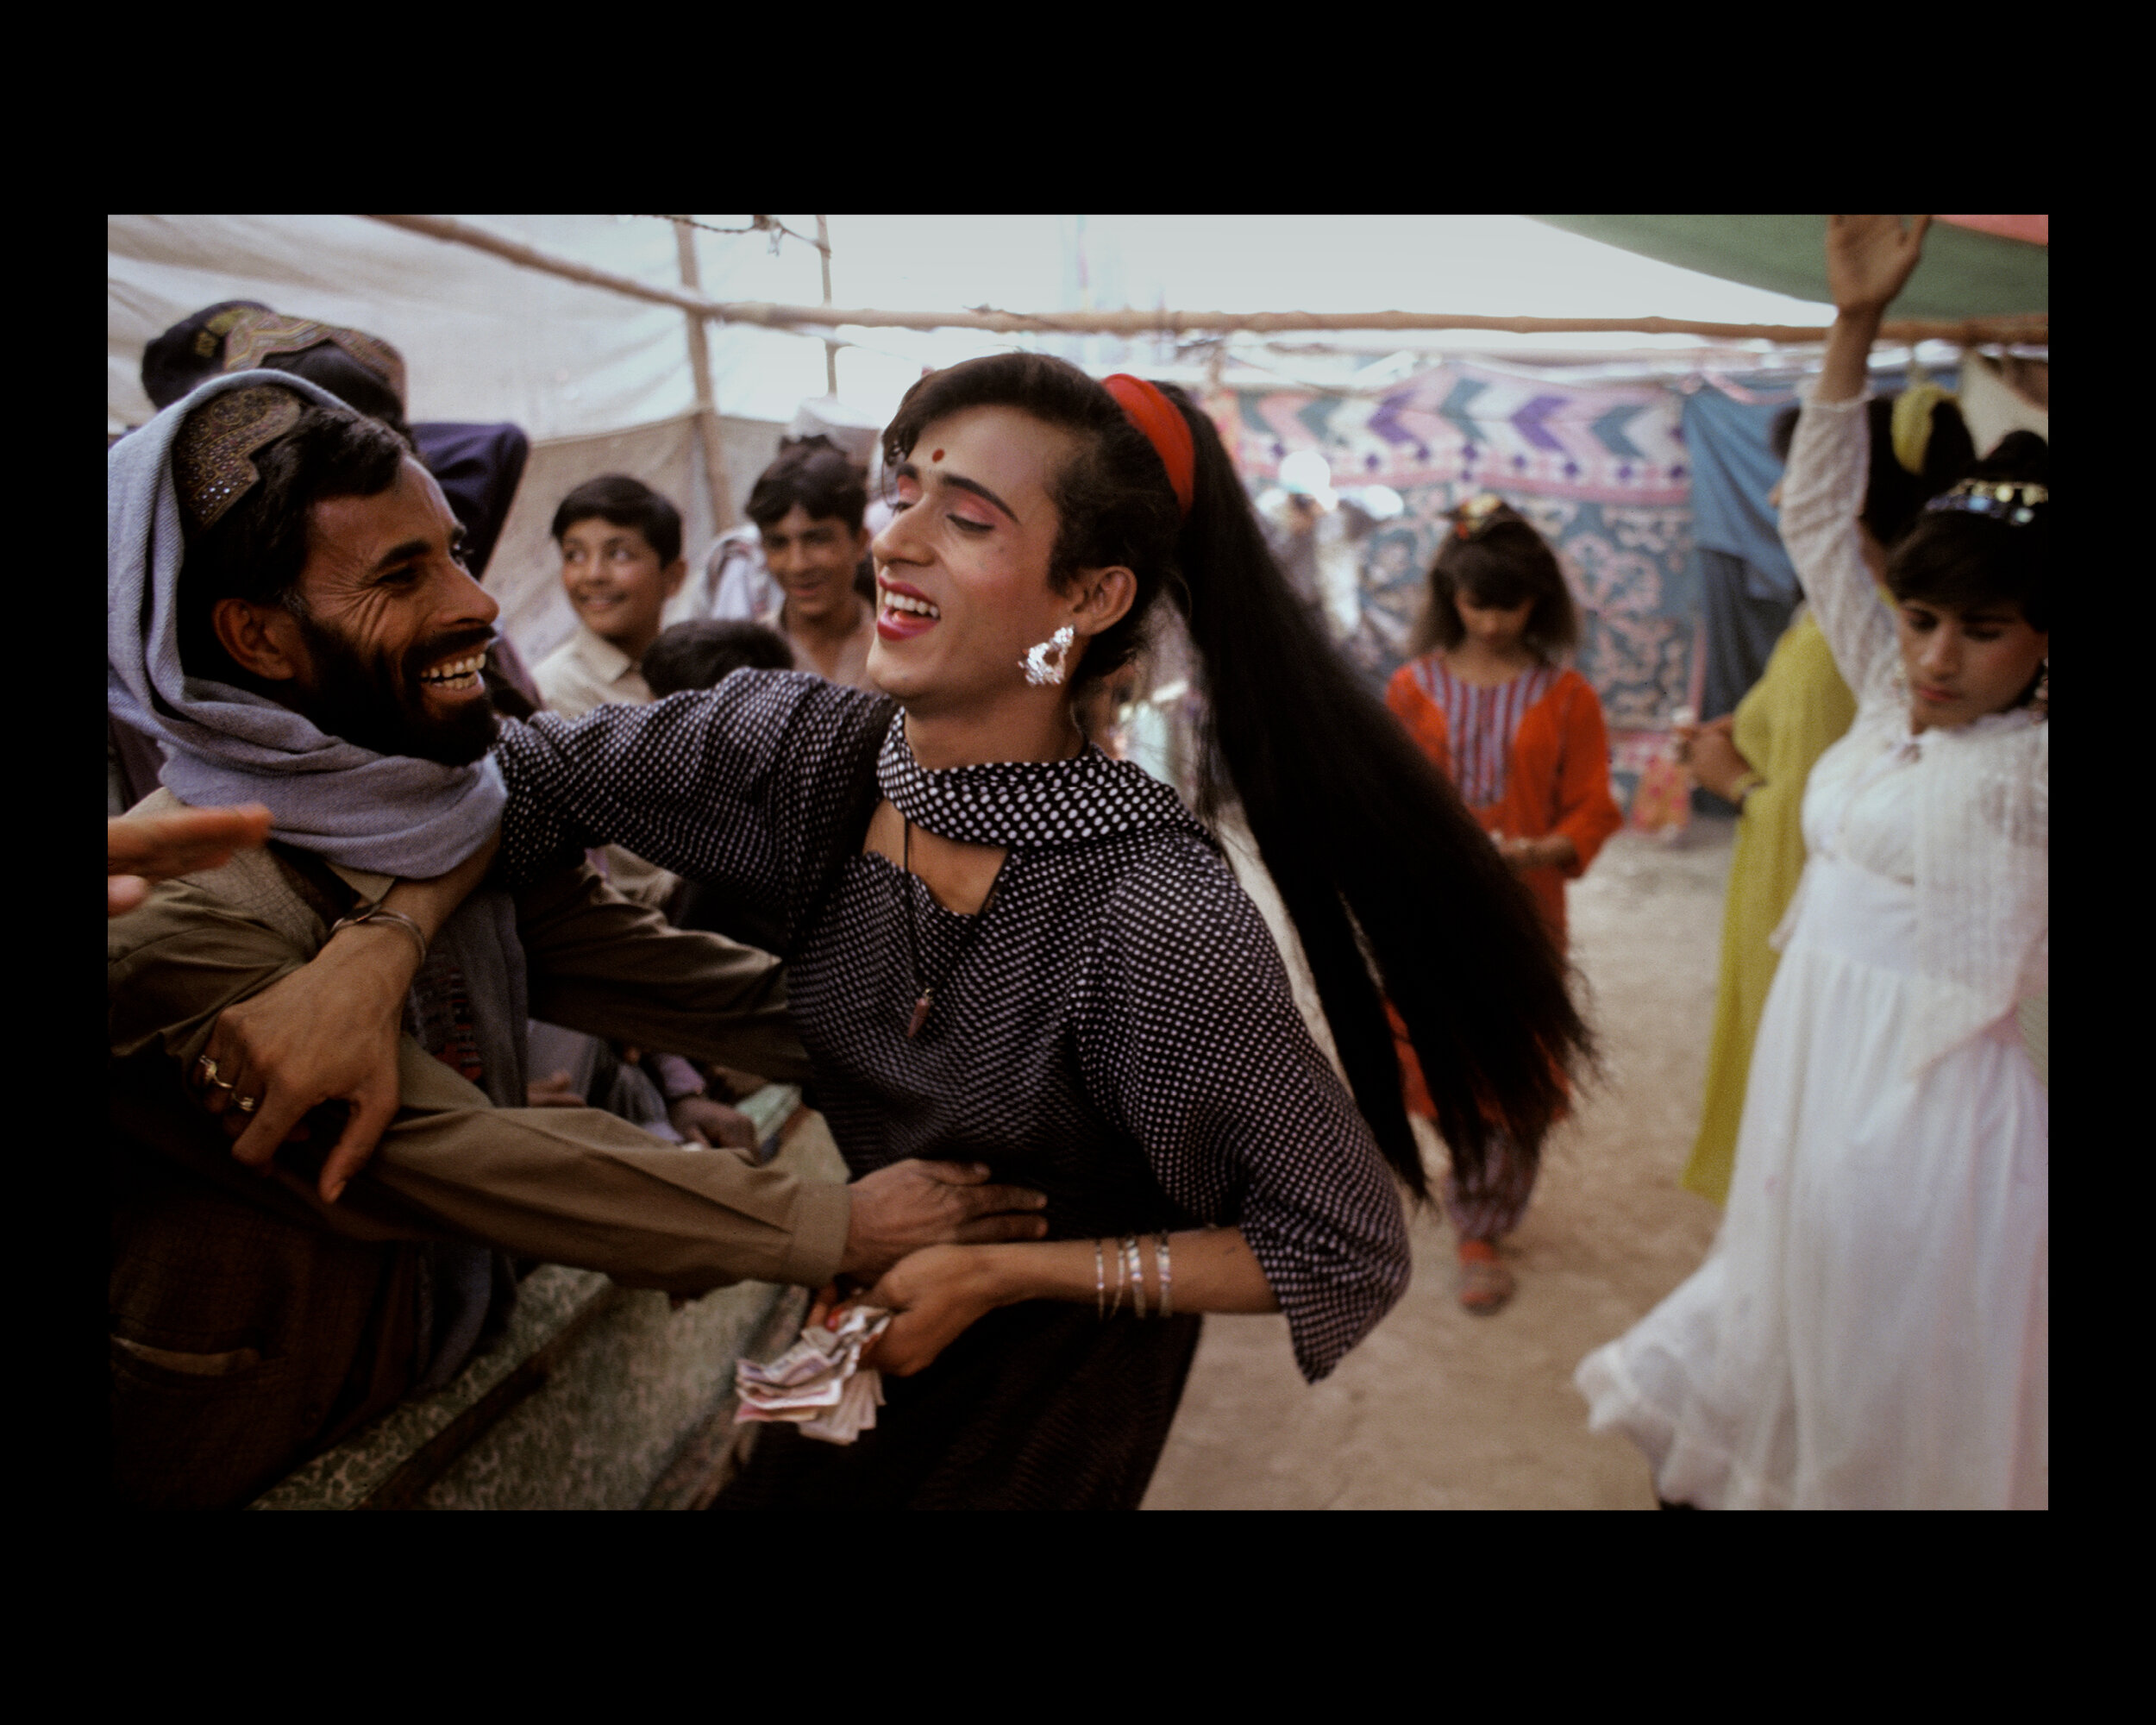  A trans person and onlooker are playful at the Sibi Mela Camel Festival in Balochistan, Pakistan. 1997 